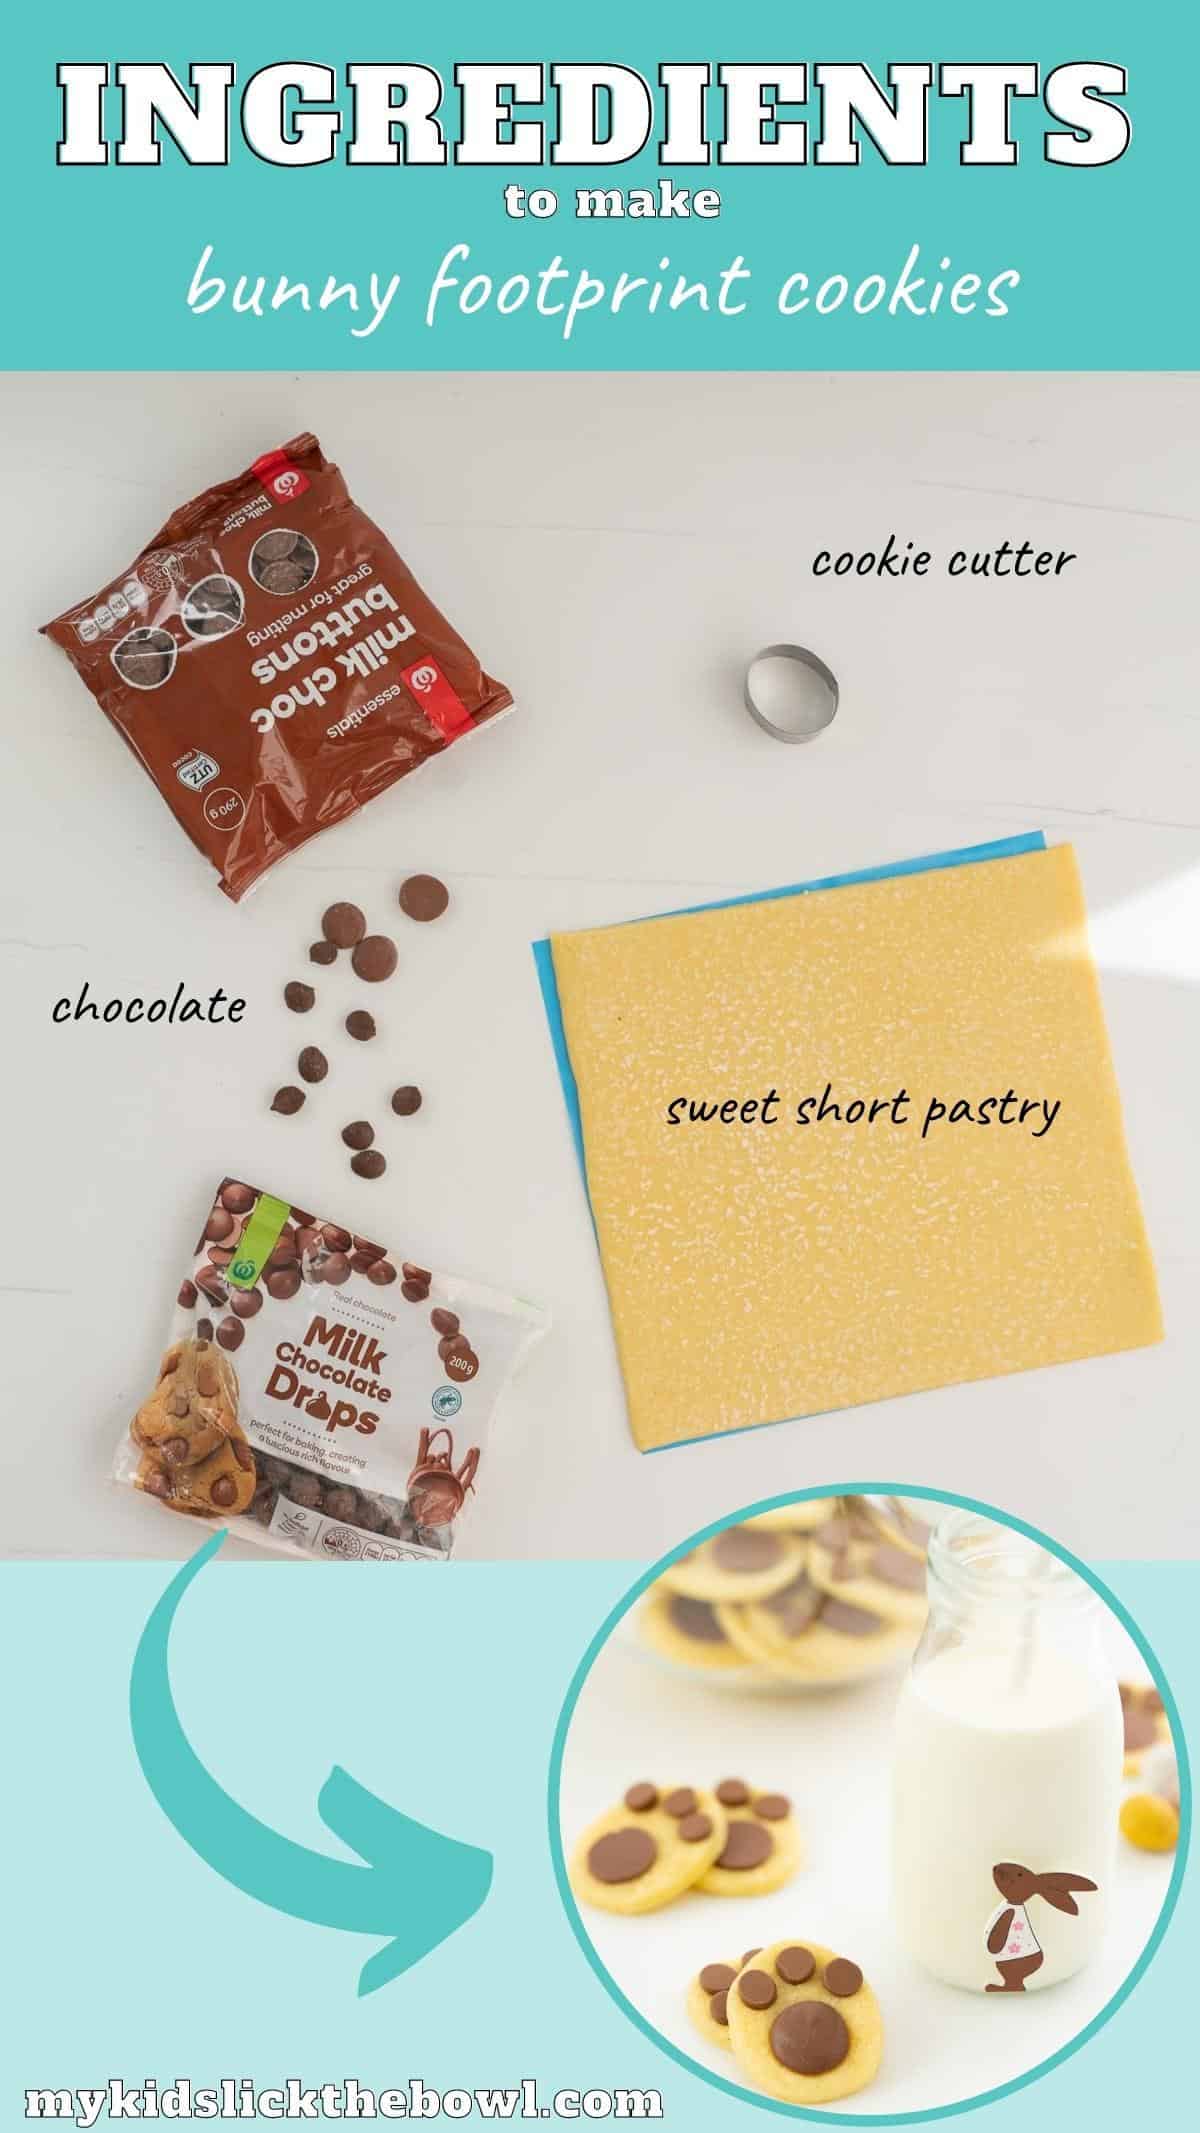 The ingredients to make bunny footprint cookies laid out on a bench top with text overlay.